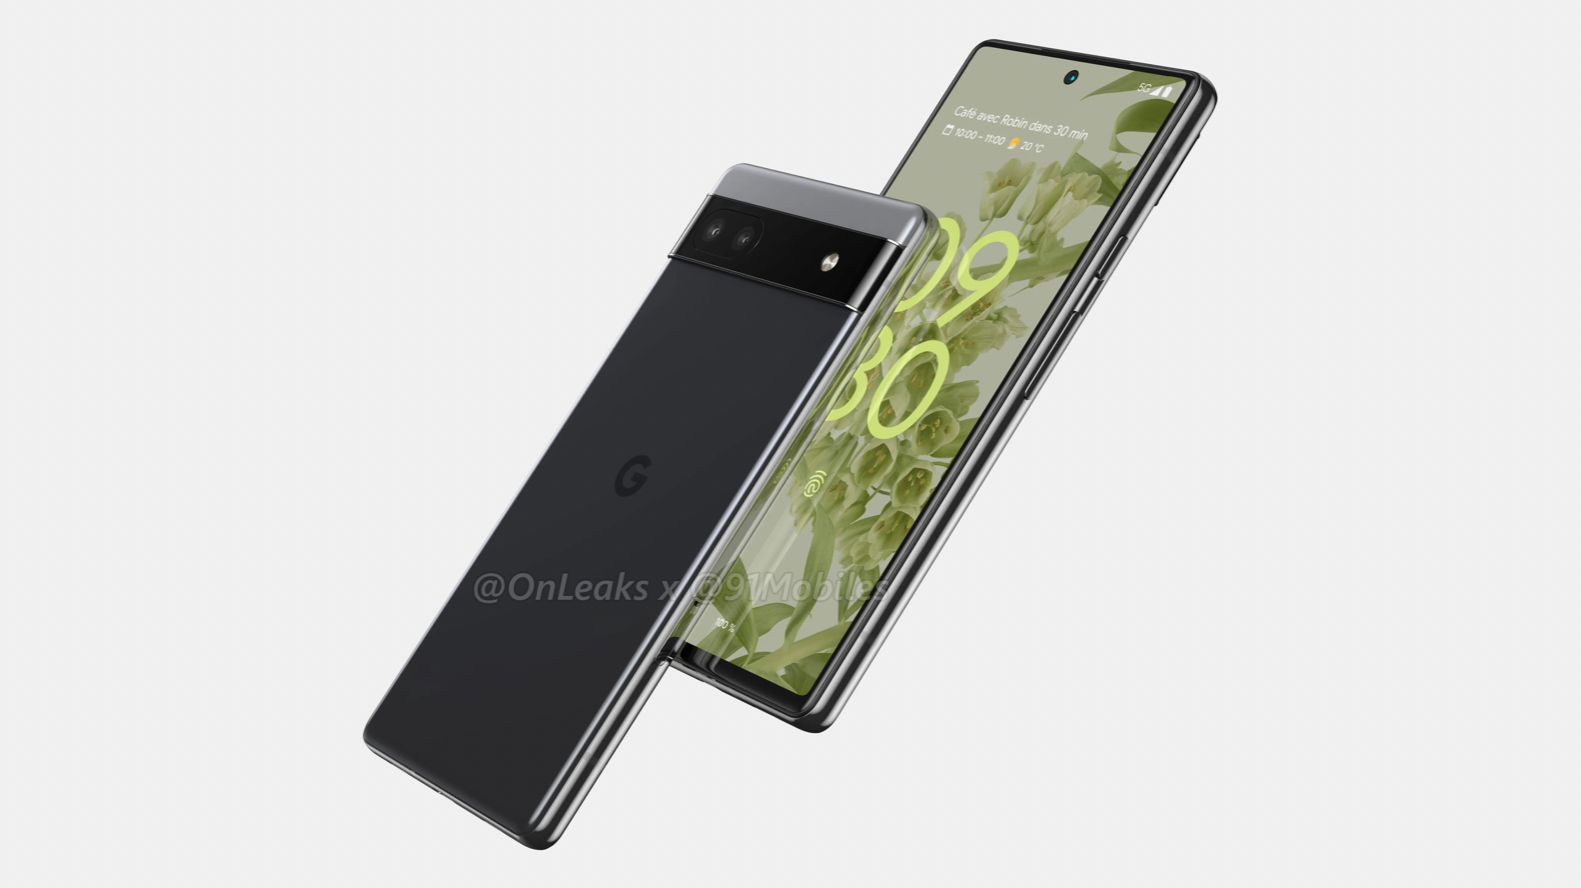 Google Pixel 6a will receive a Tensor chip and a camera that will be different from the Pixel 6 and Pixel 6 Pro